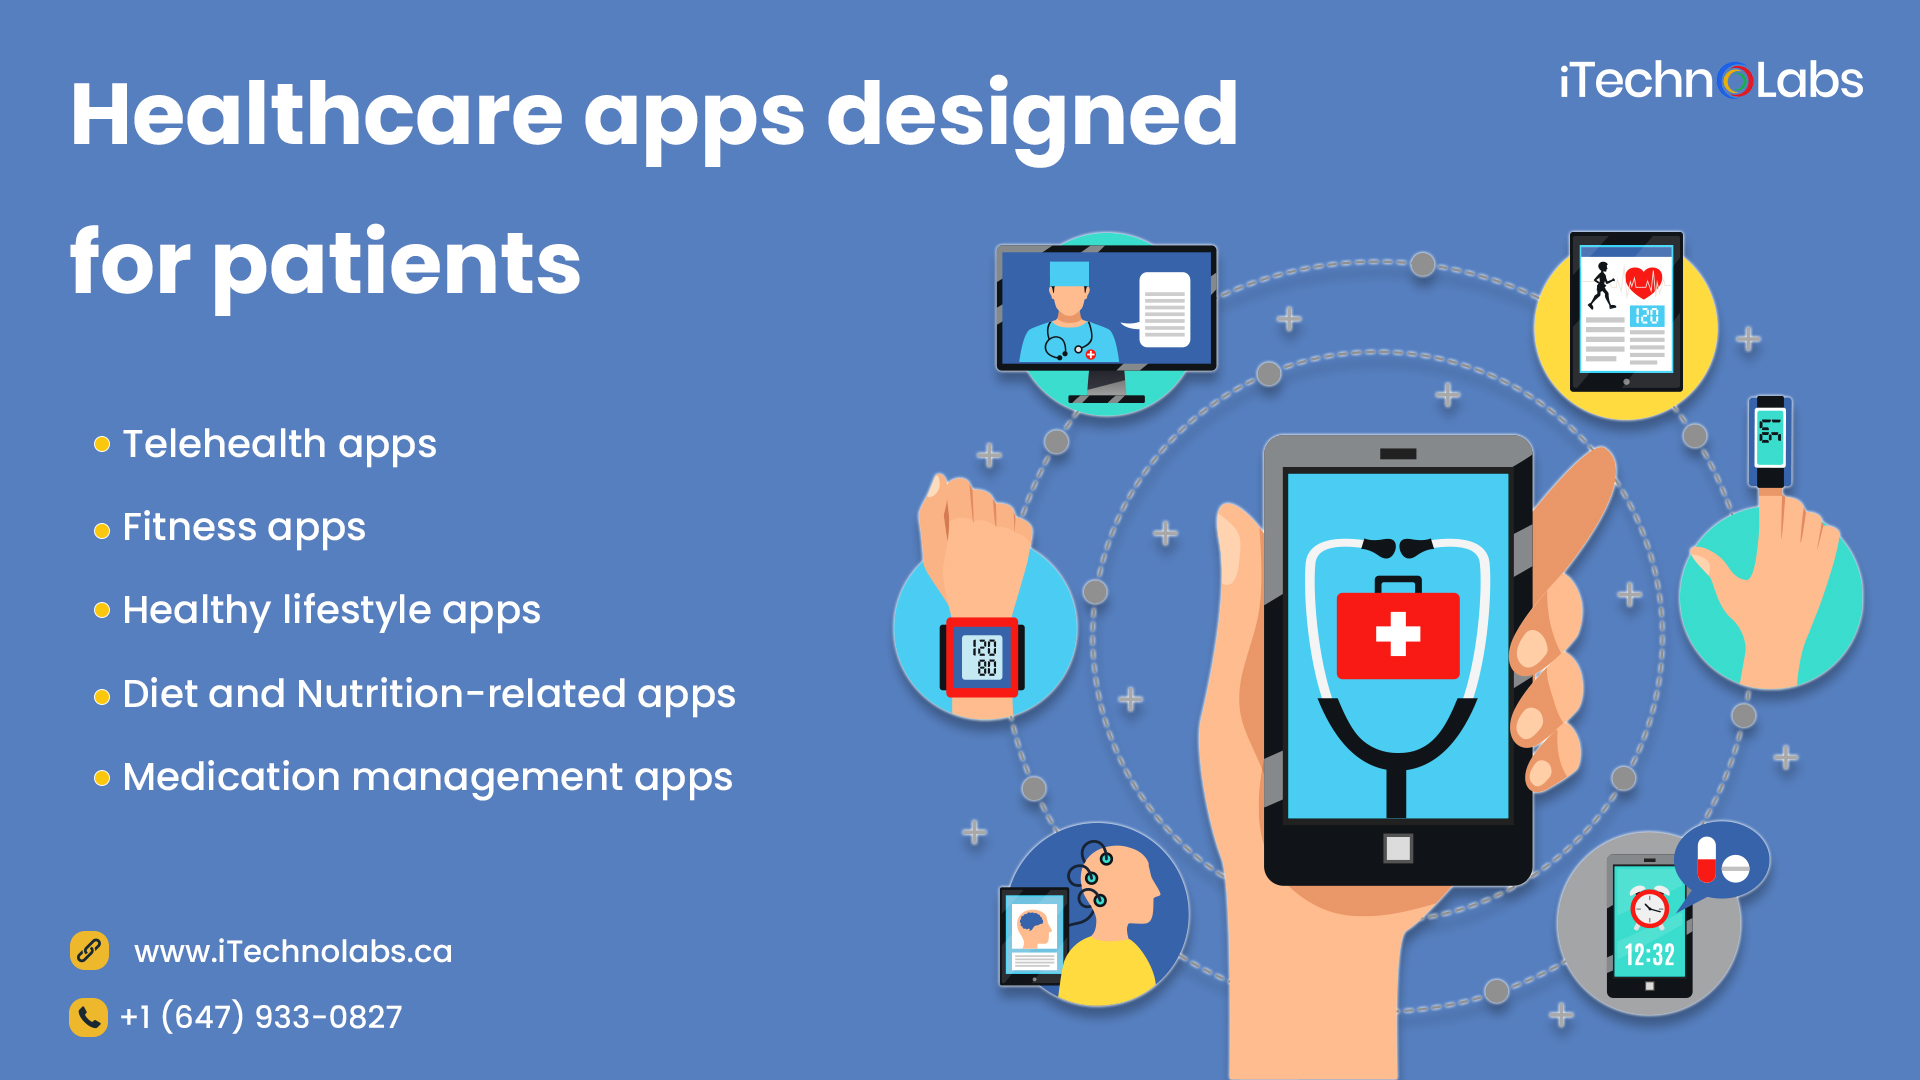 Healthcare-apps-designed-for-patients-itechnolabs